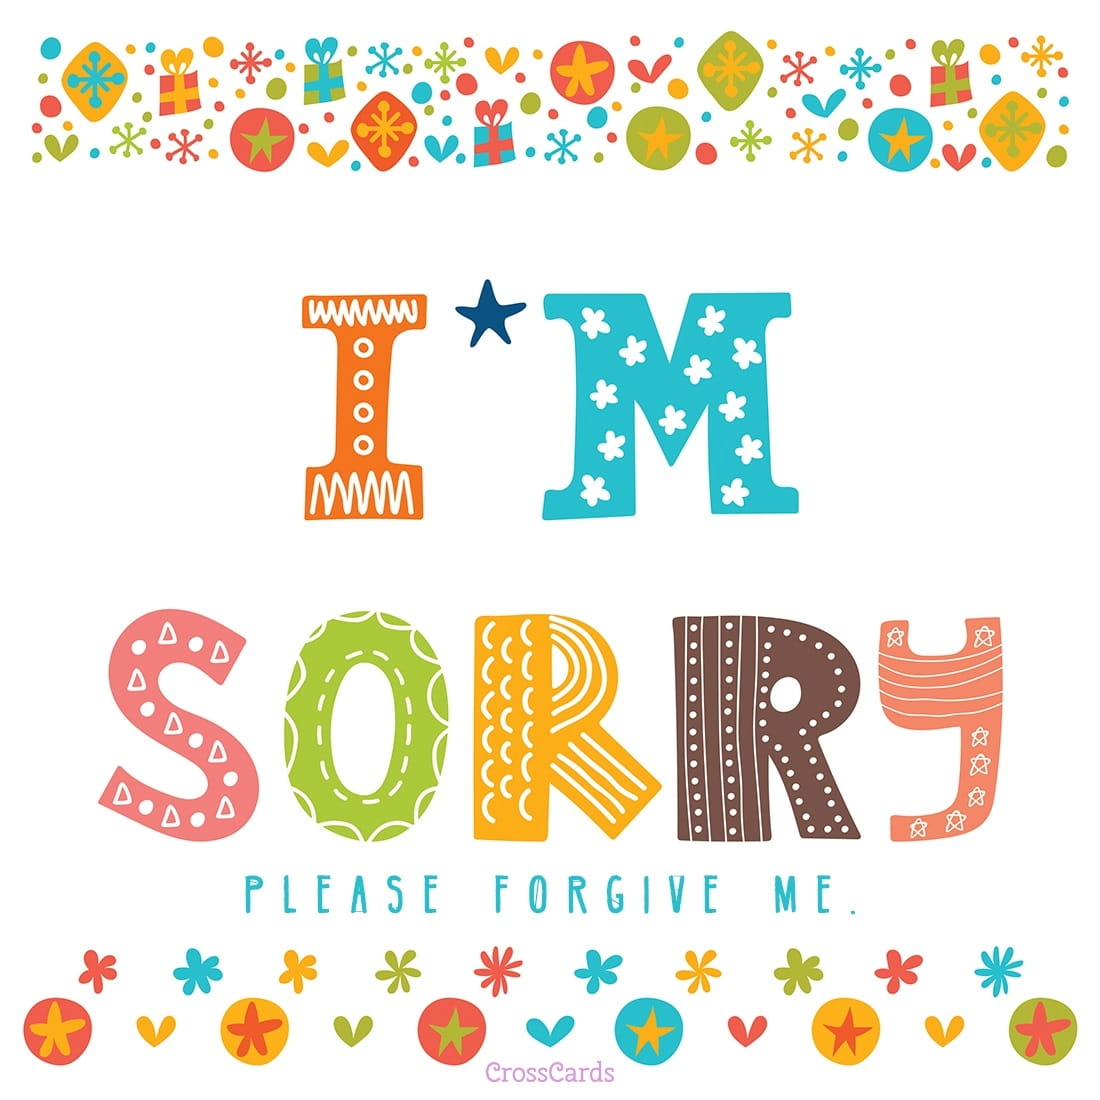 free-i-m-sorry-forgive-me-ecard-email-free-personalized-oops-and